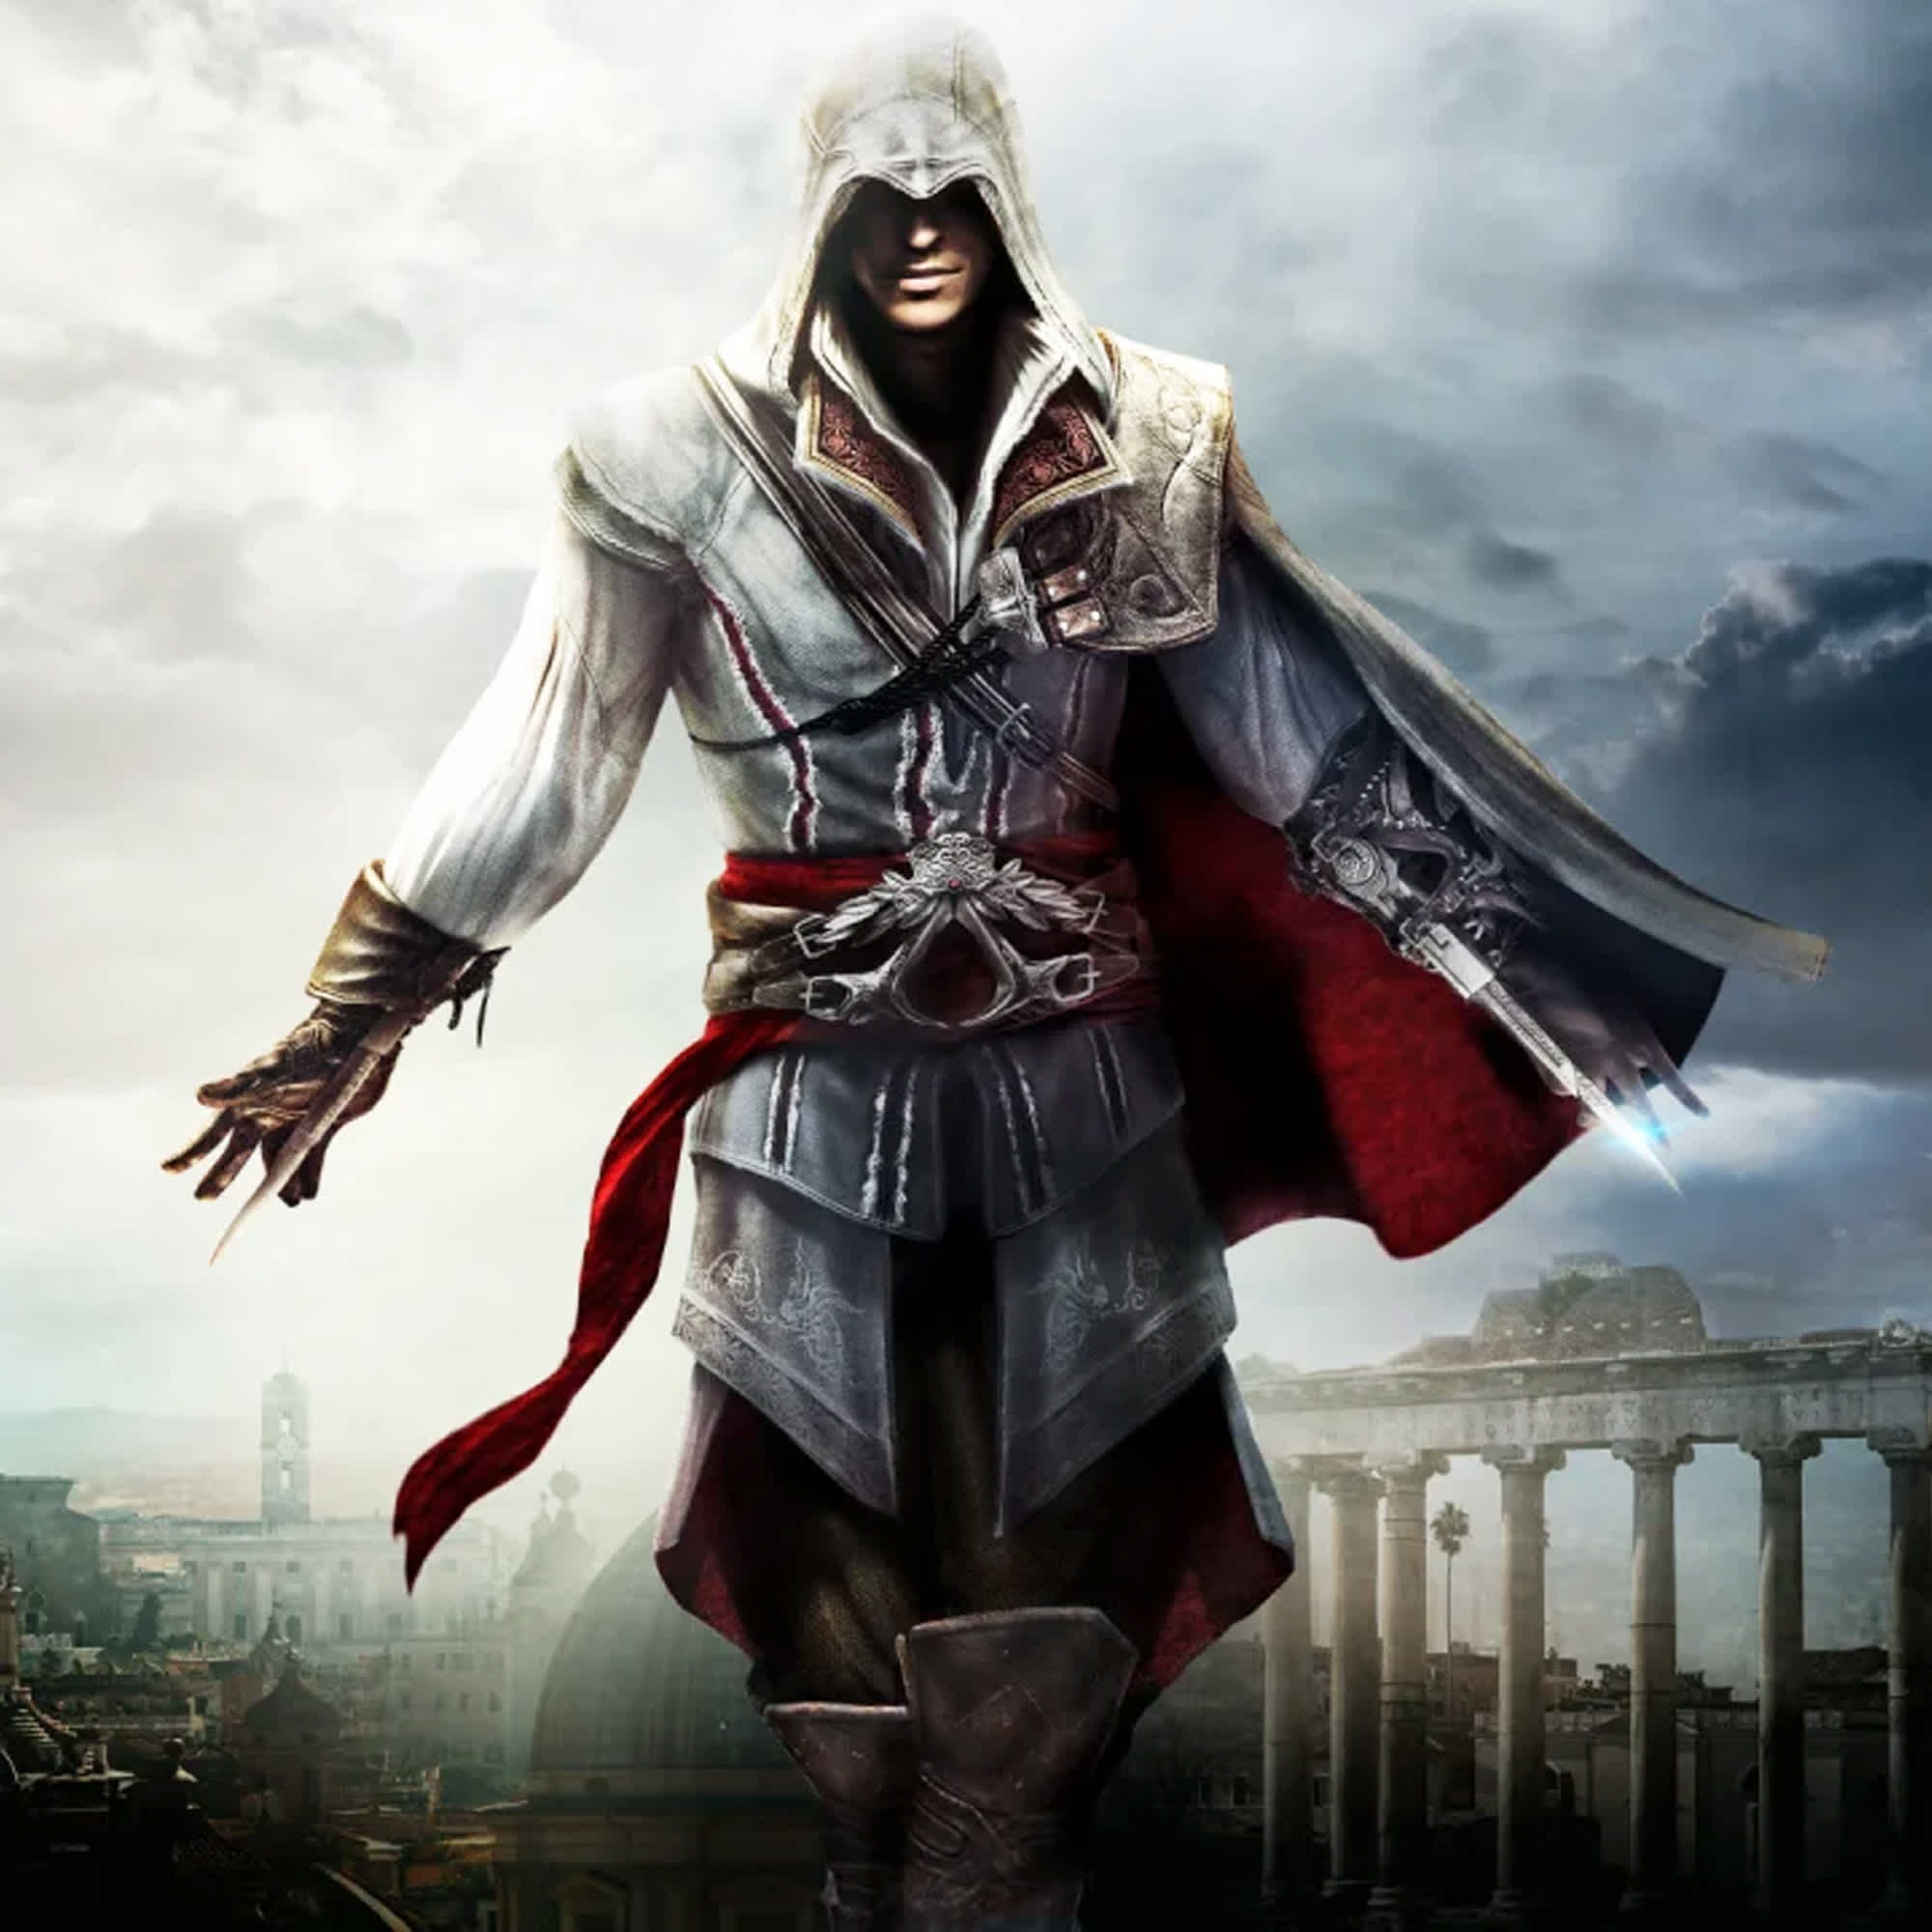 Assassin's Creed II: Discovery for iPhone